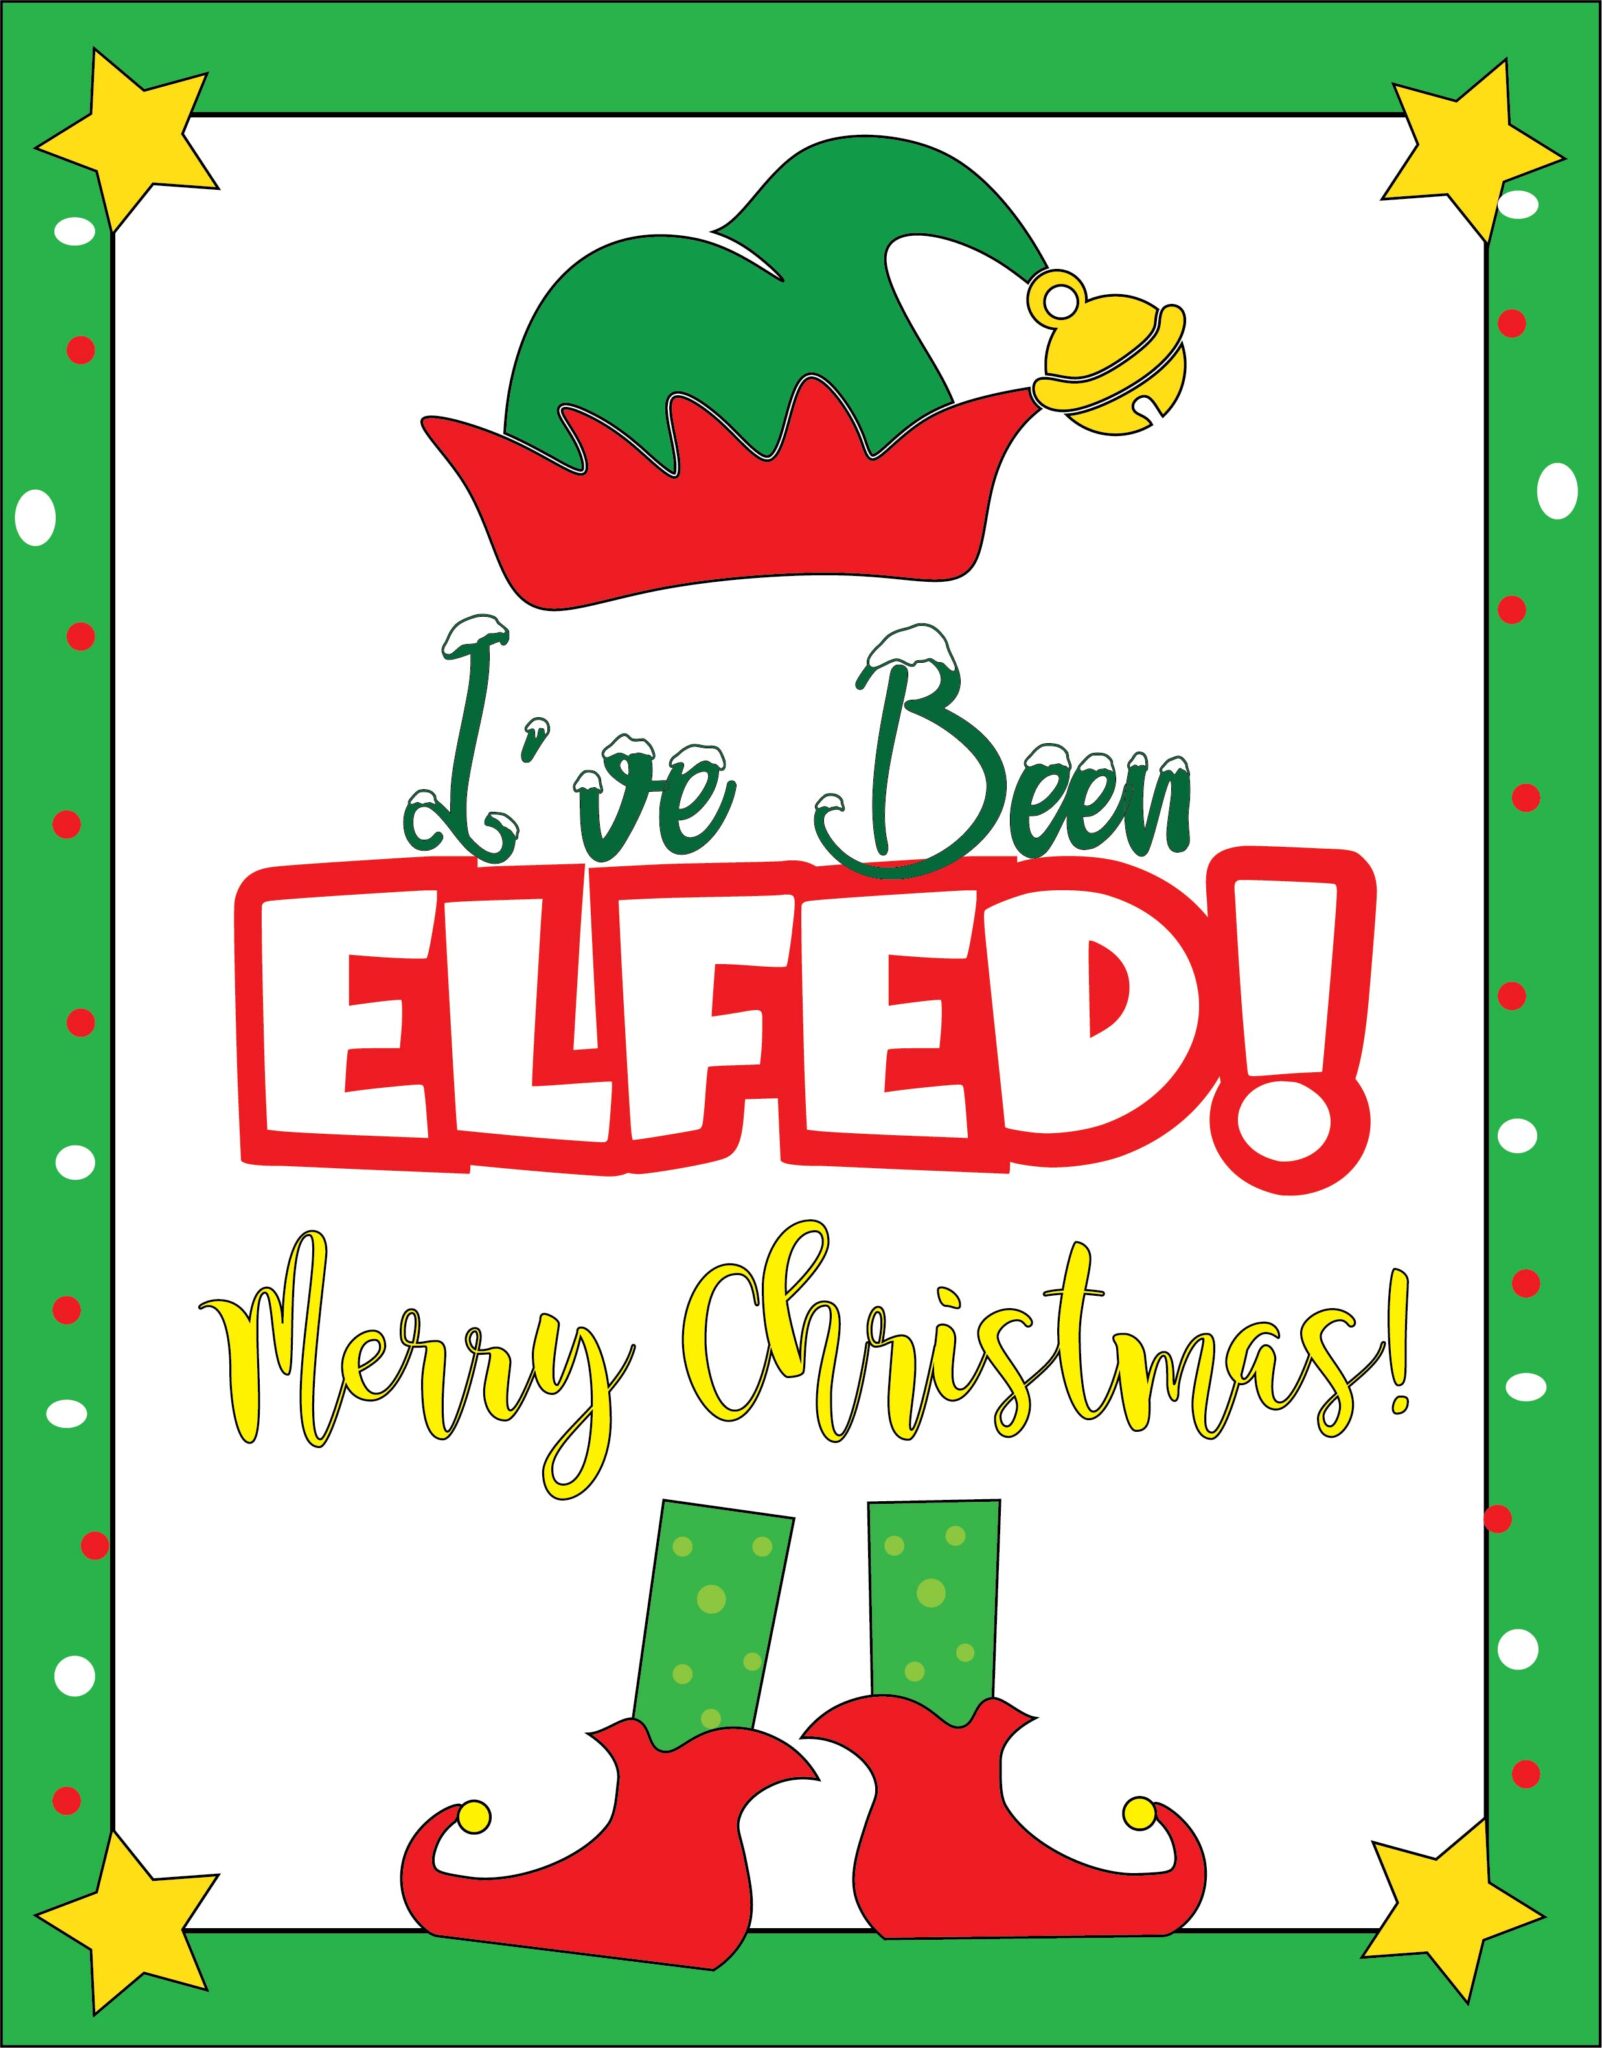 FREE You've Been Elfed Printables to Spread Holiday Cheer! Leap of